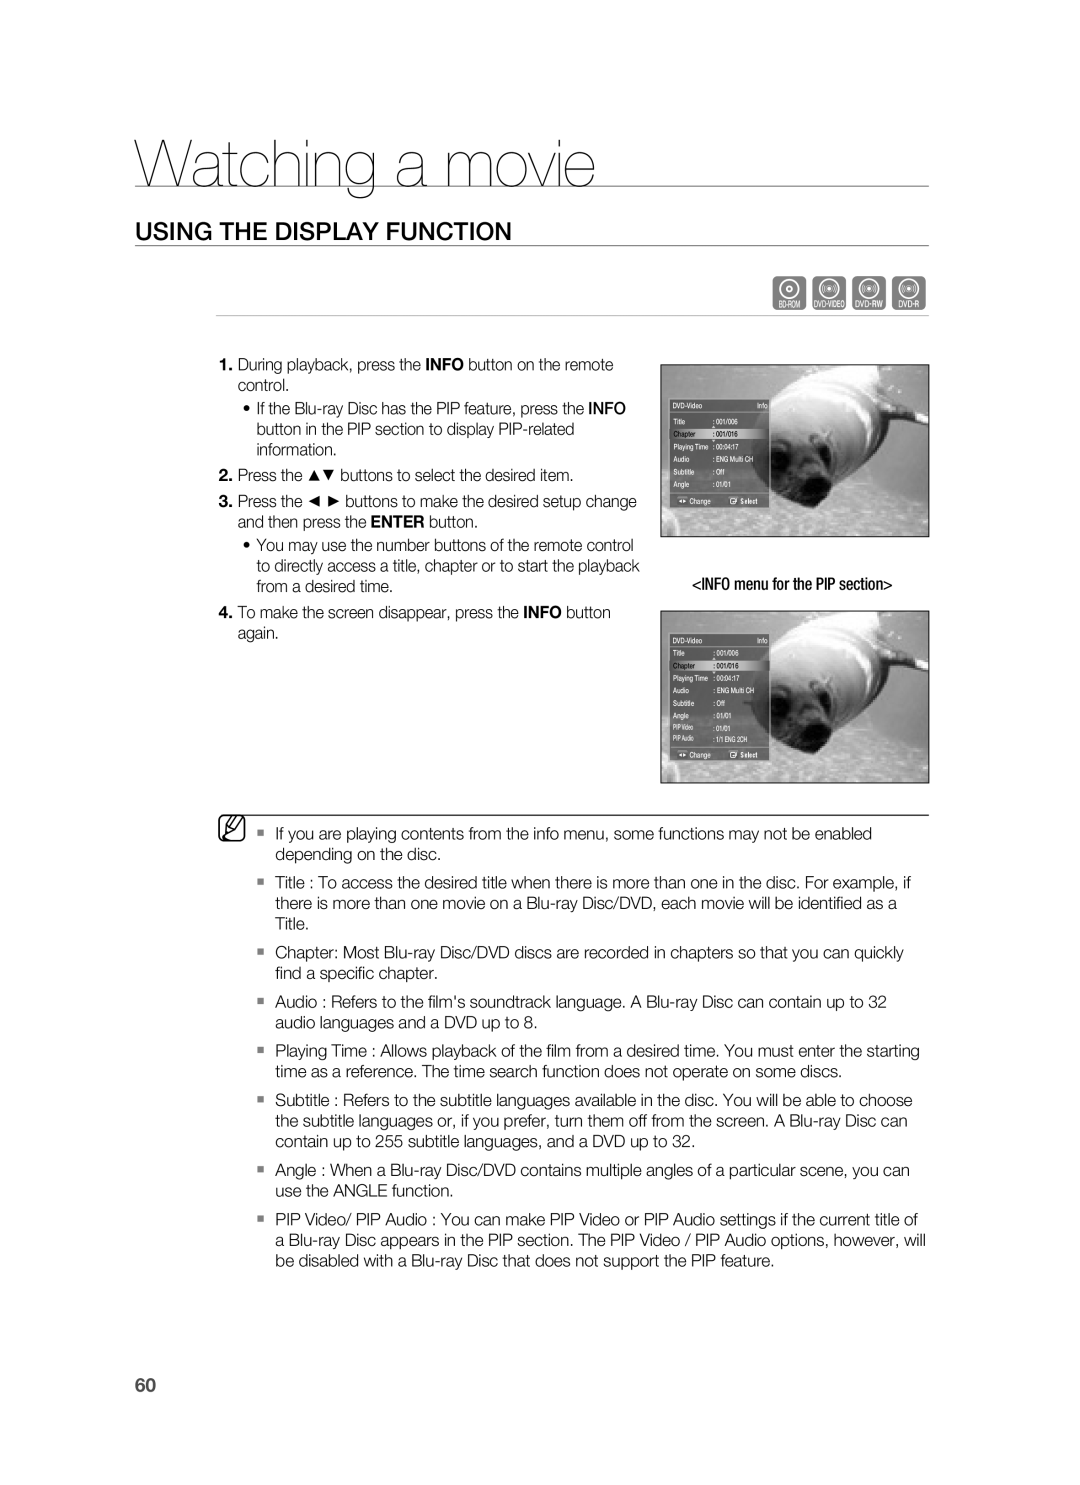 Samsung AH68-02178Z, HT-BD1200 user manual Watching a movie, hZCV, Using The Display Function 